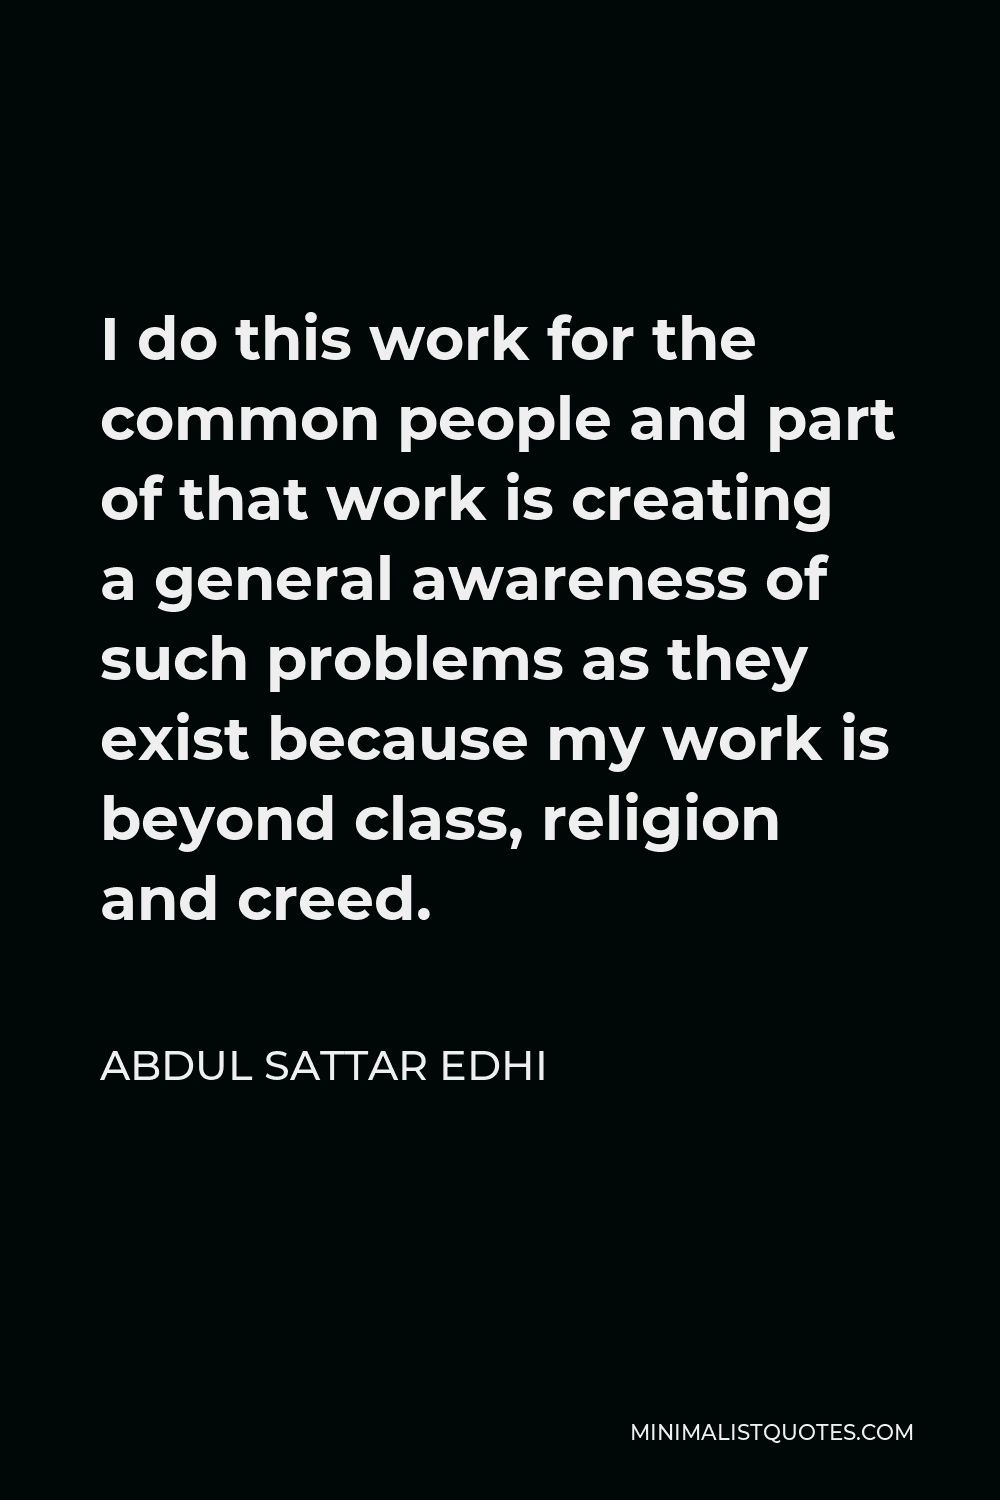 Abdul Sattar Edhi Quote - I do this work for the common people and part of that work is creating a general awareness of such problems as they exist because my work is beyond class, religion and creed.